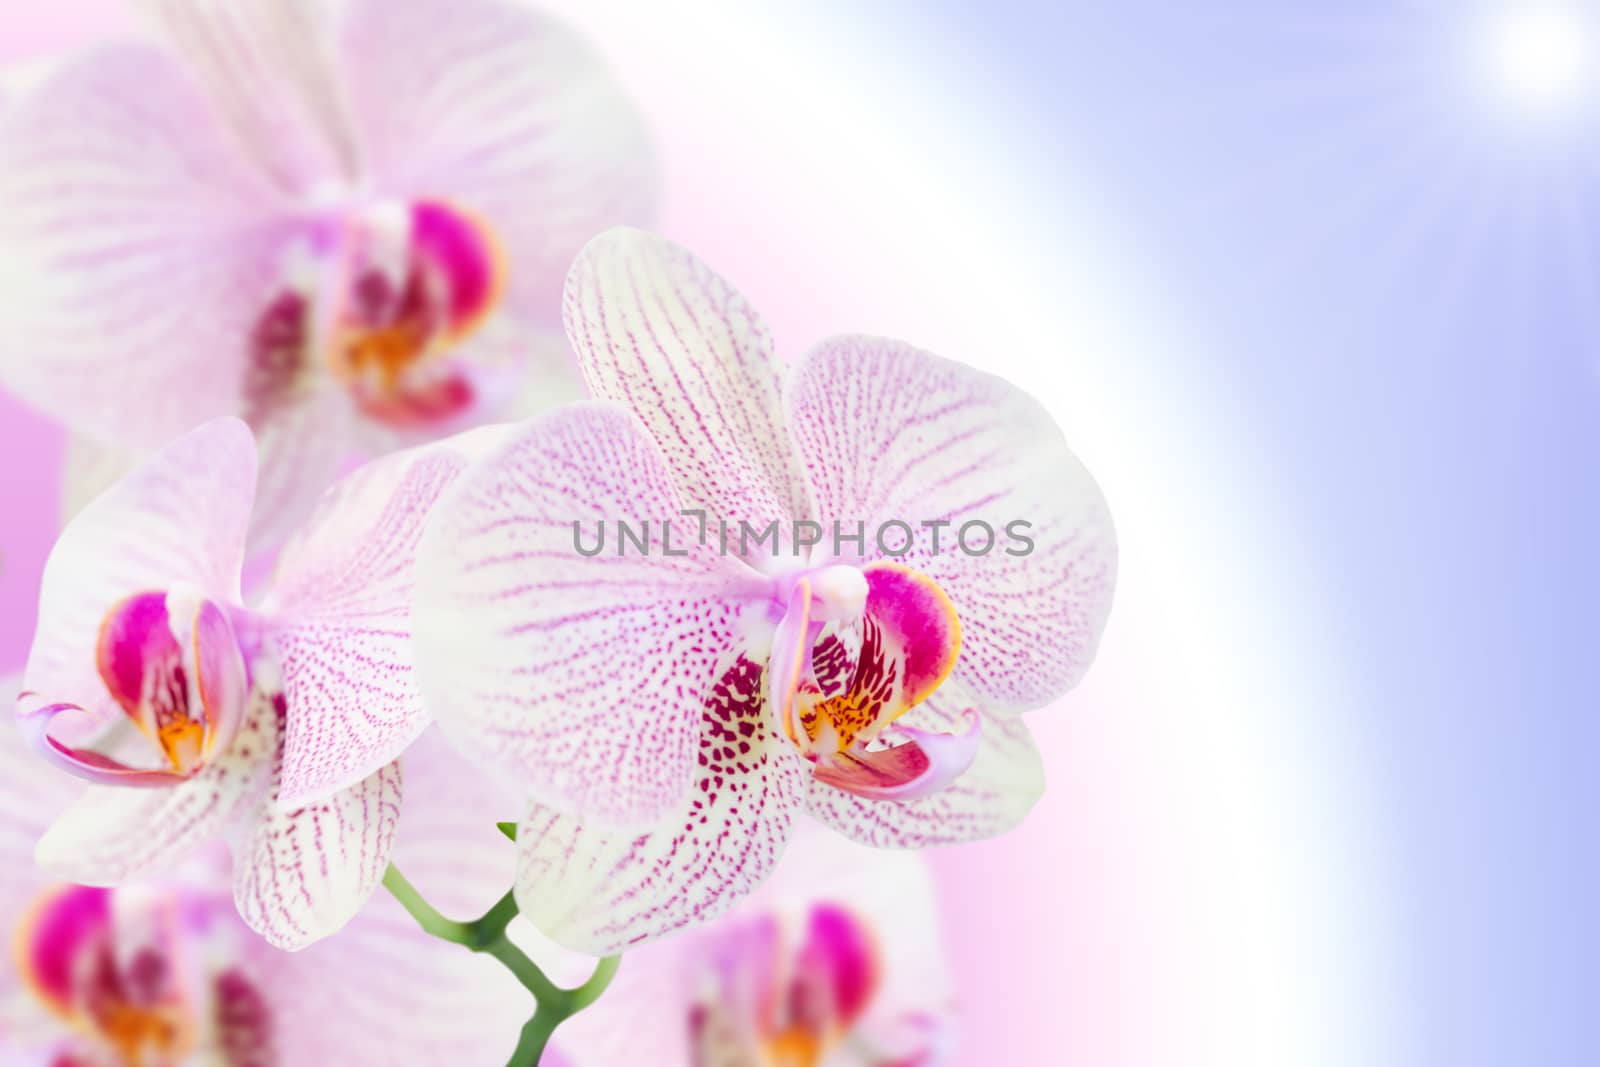 Spotted orchid flower on natural gradient blurred background with free copy-space area